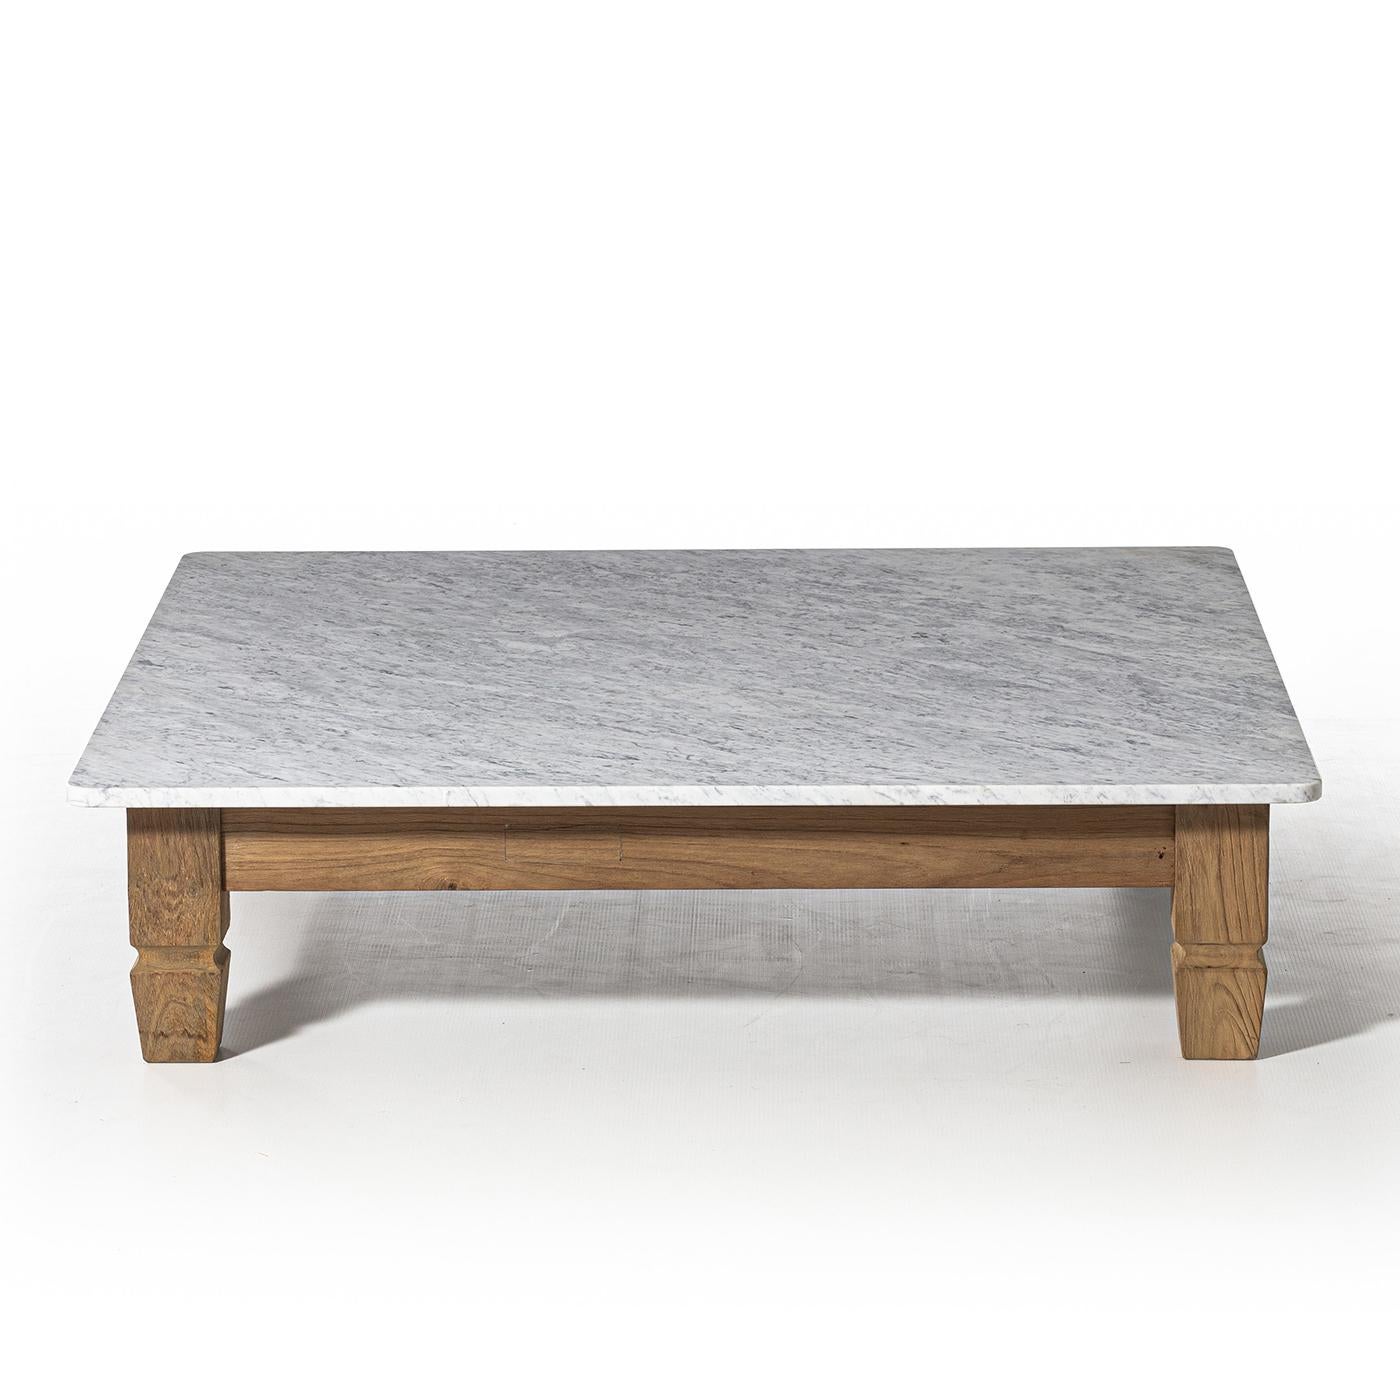 Coffee table Barletta with structure in solid teak
wood and with polished carrare white marble top.